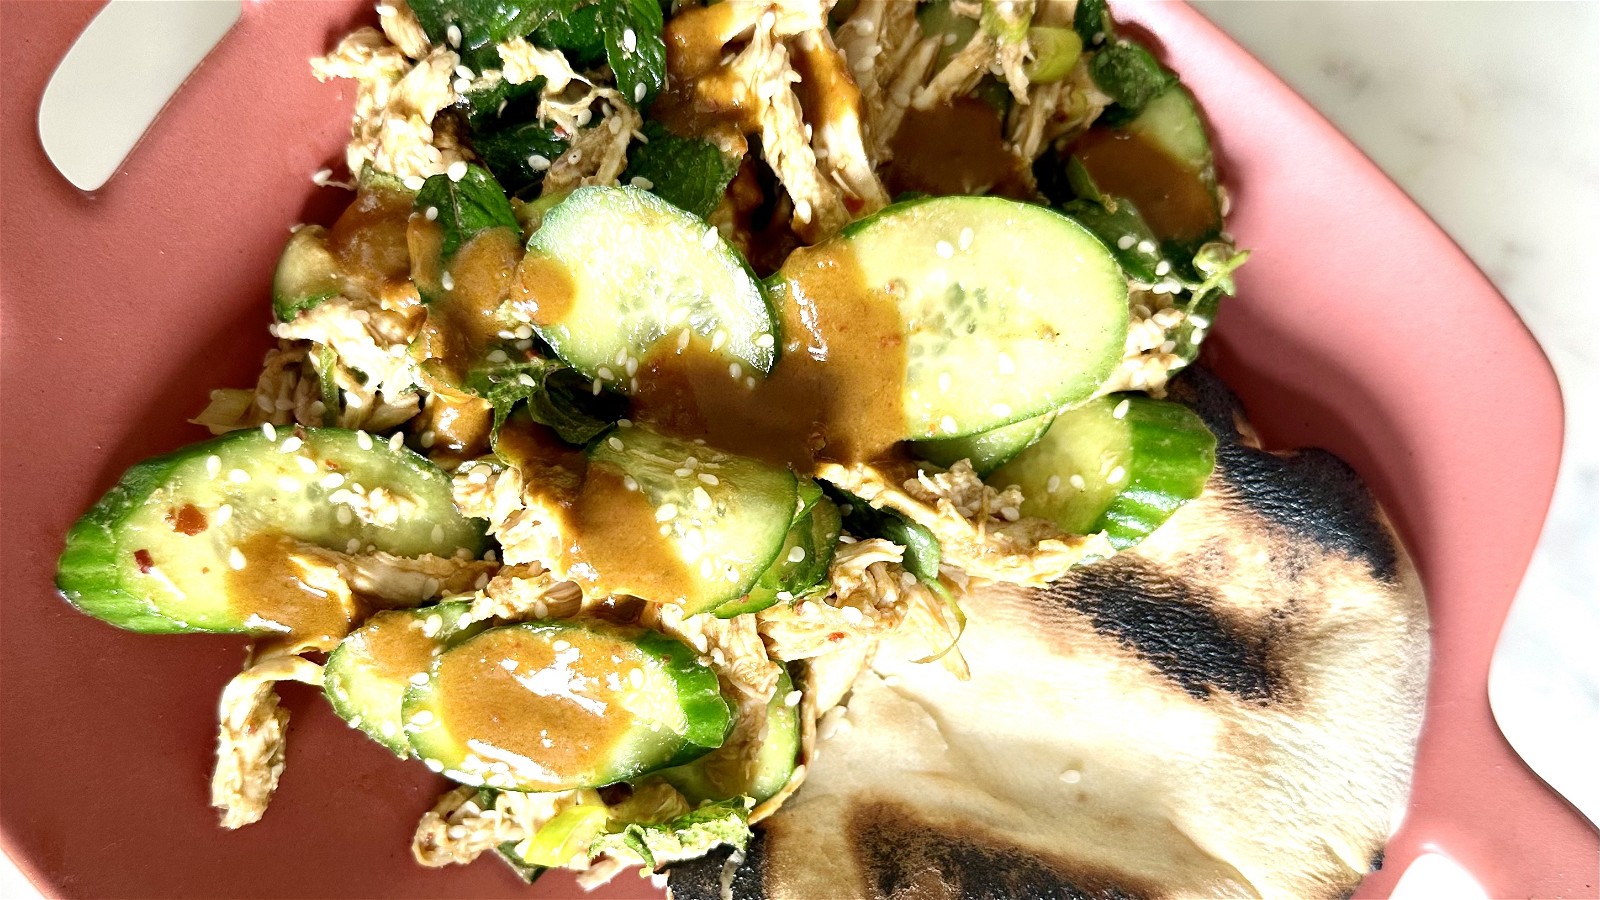 Image of Cold Chicken Chili Lime Salad with Cucumbers and Sesame